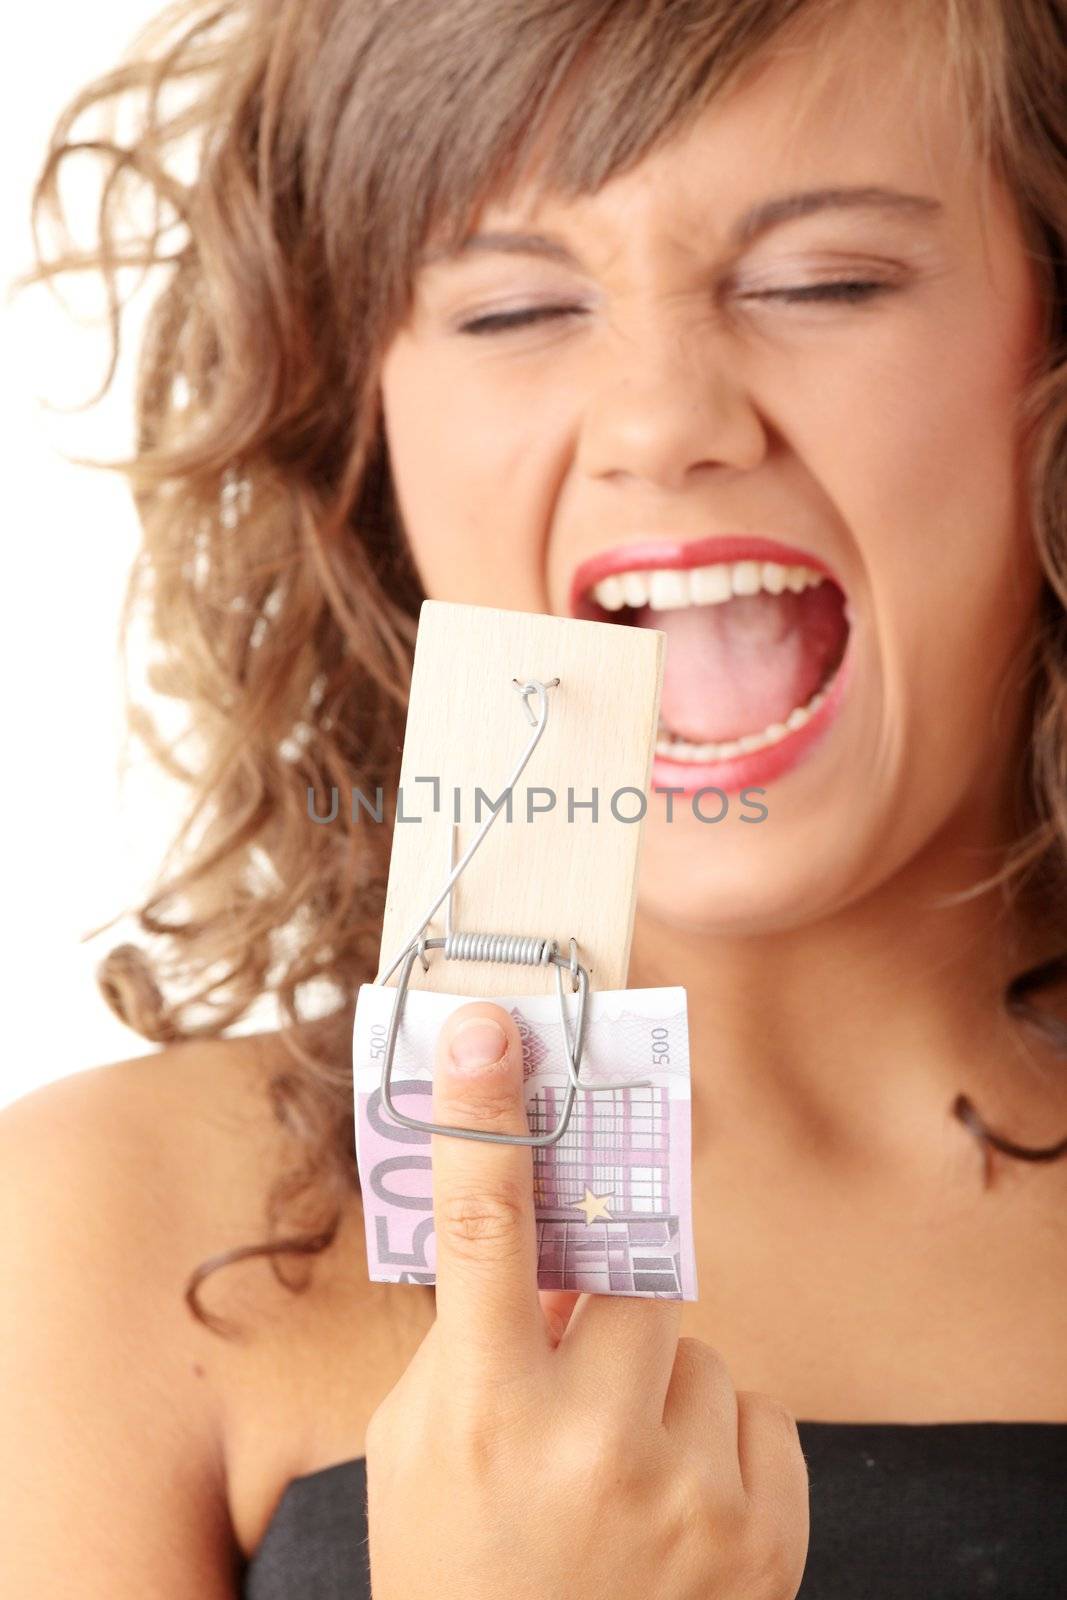 Screaming woman after geting traped by mouse trap with 500 euro